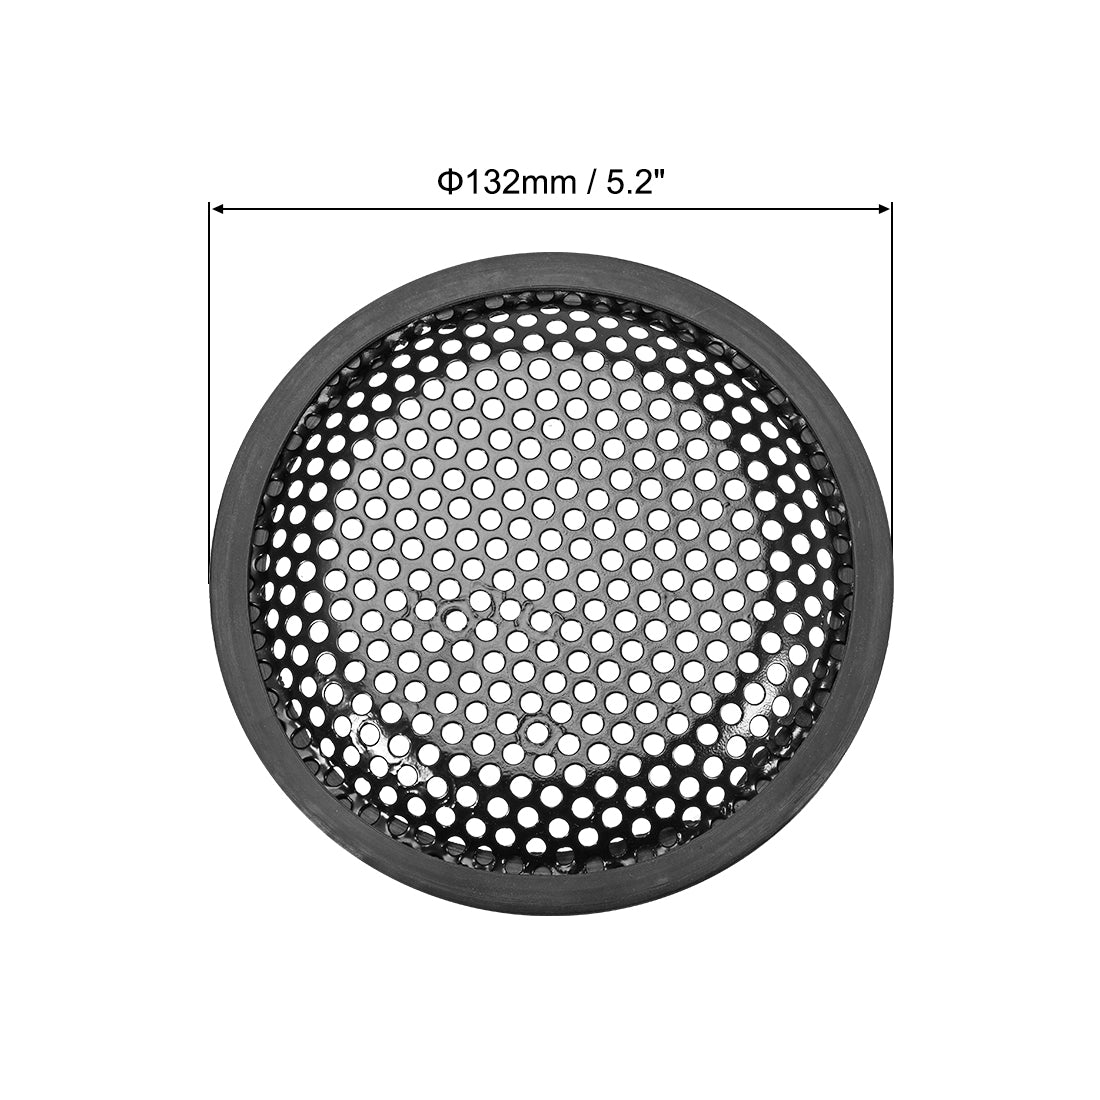 uxcell Uxcell 5" Speaker Waffle Grill Metal Mesh Audio Subwoofer Guard Protector Cover with Clips,Screws